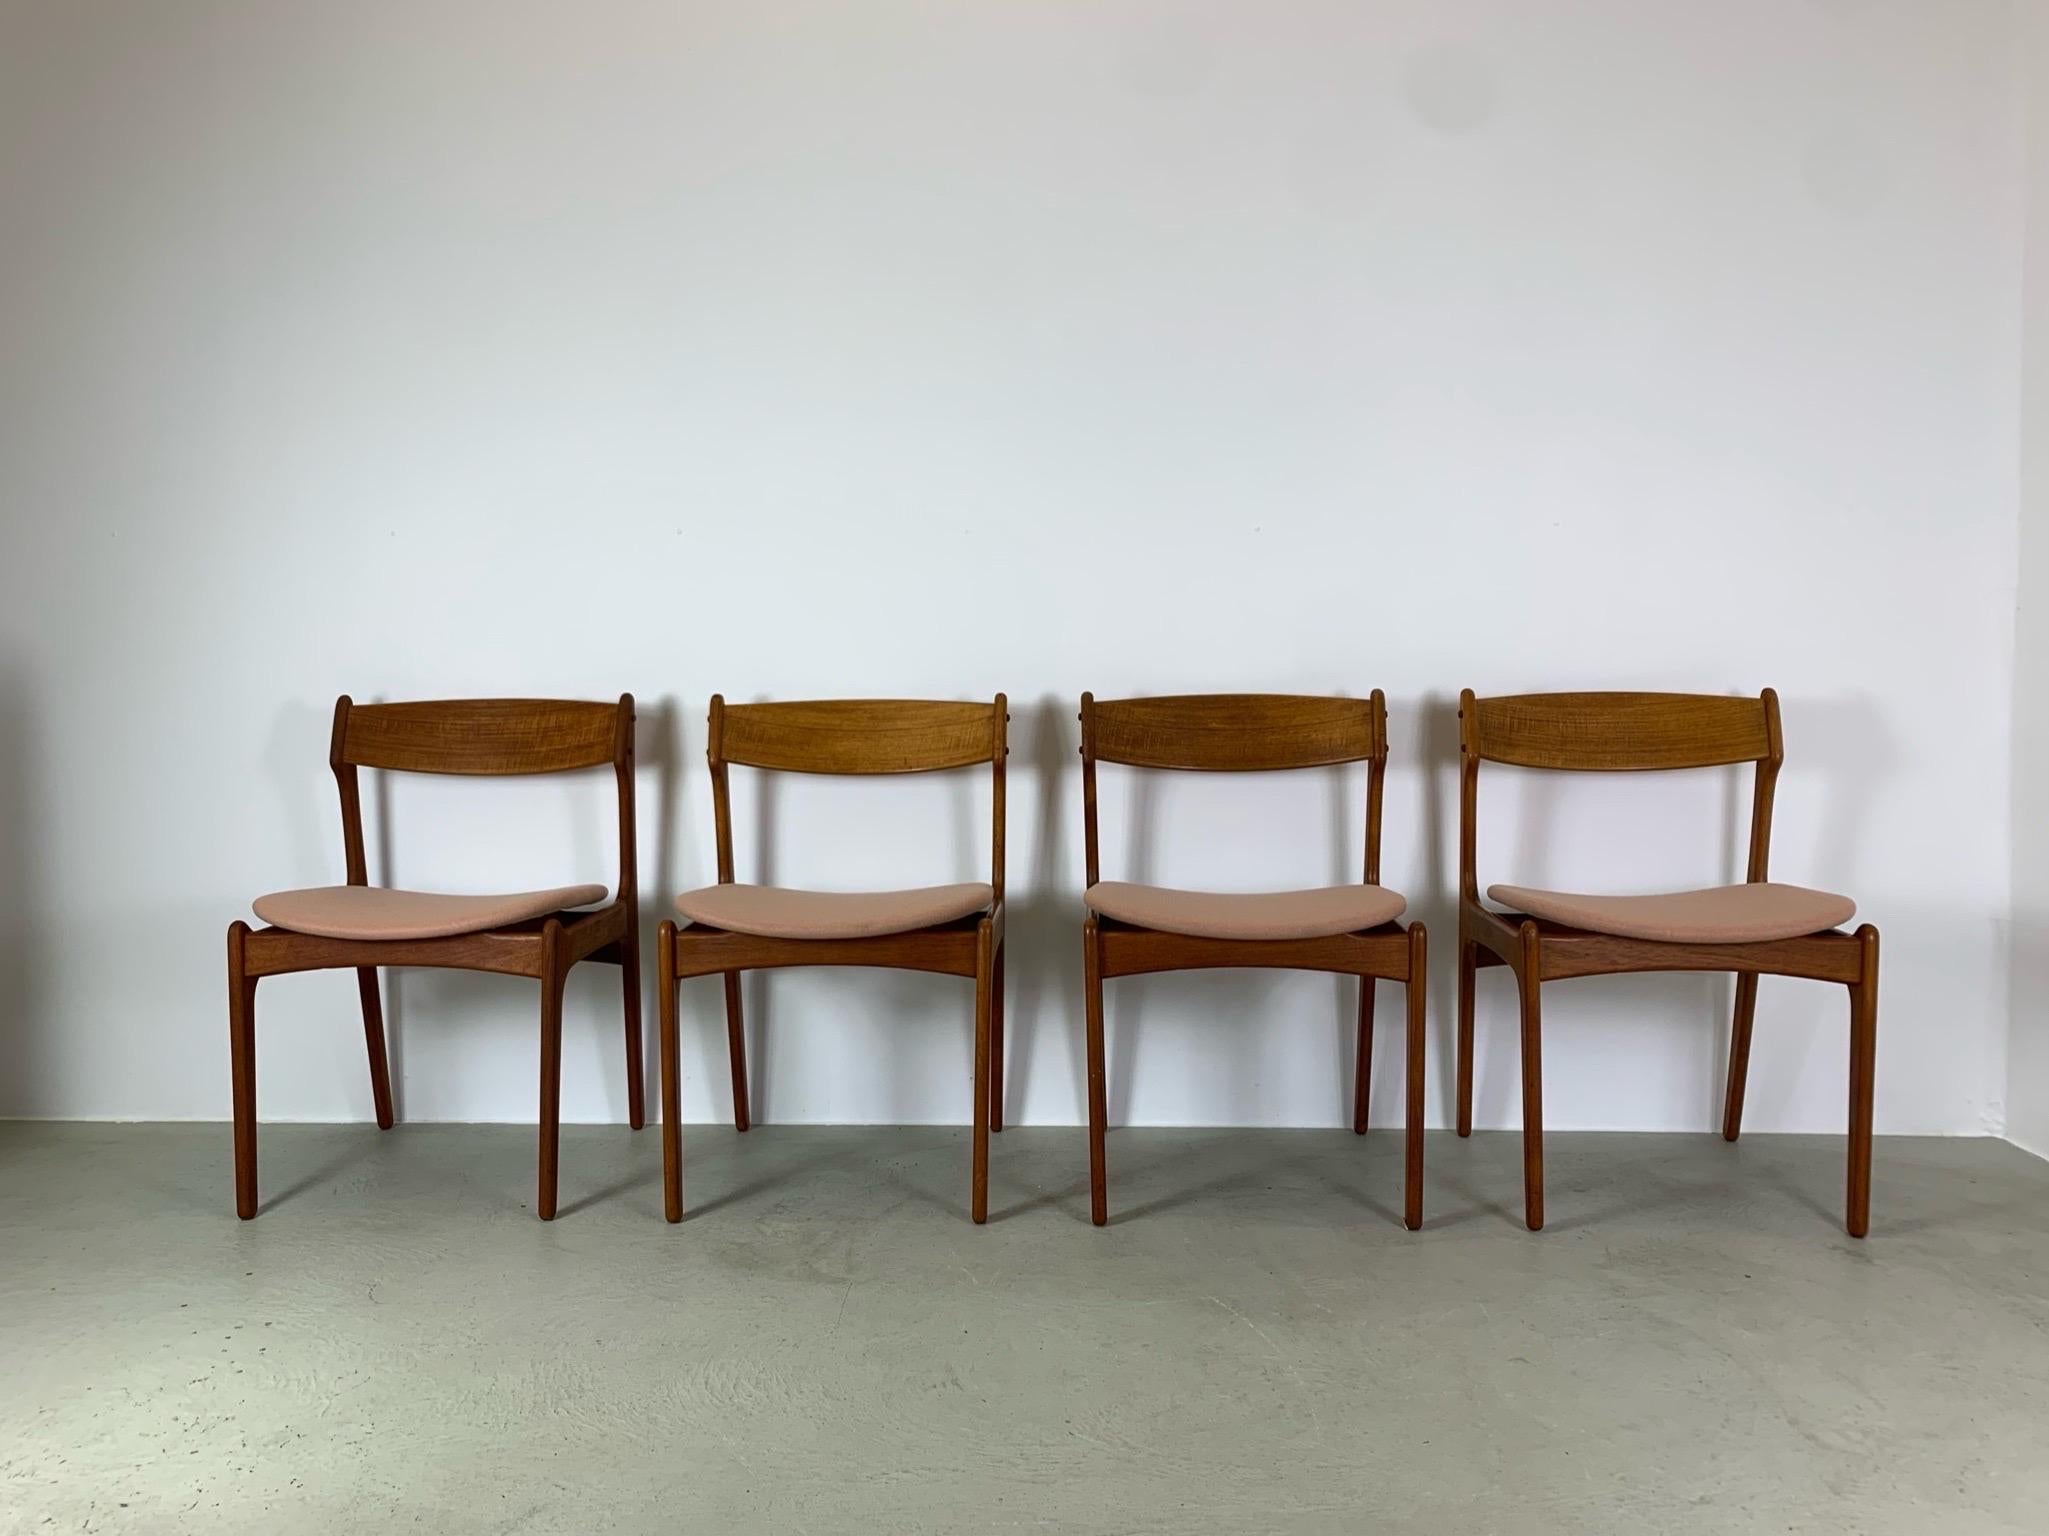 4x Skandinavian Dining Chairs by Erik Buch, Denmark 1950s In Excellent Condition For Sale In St-Brais, JU